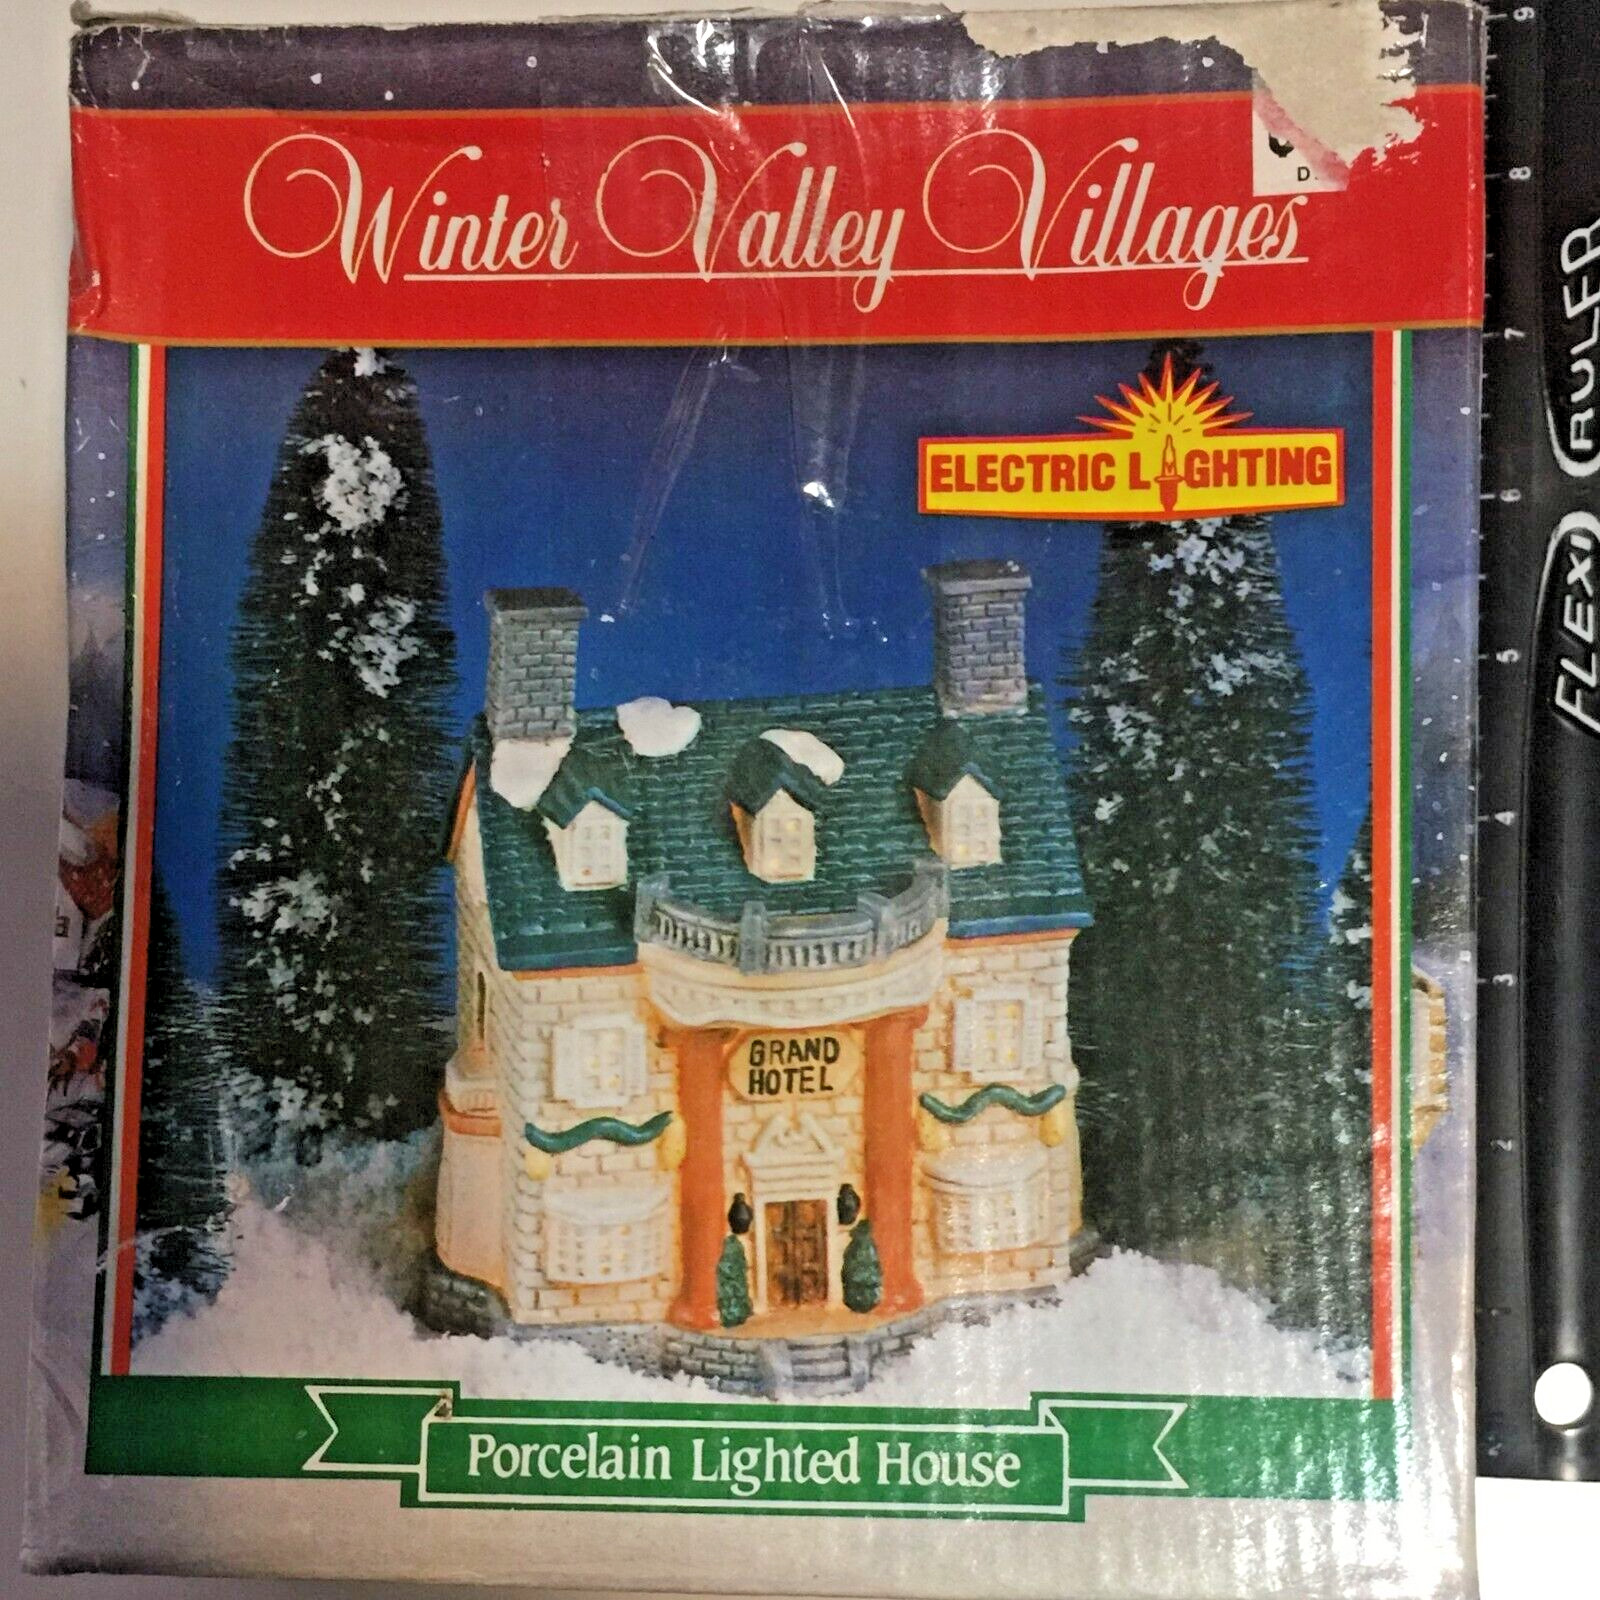 Winter Valley Villages Grand Hotel Porcelain Lighted House Christmas